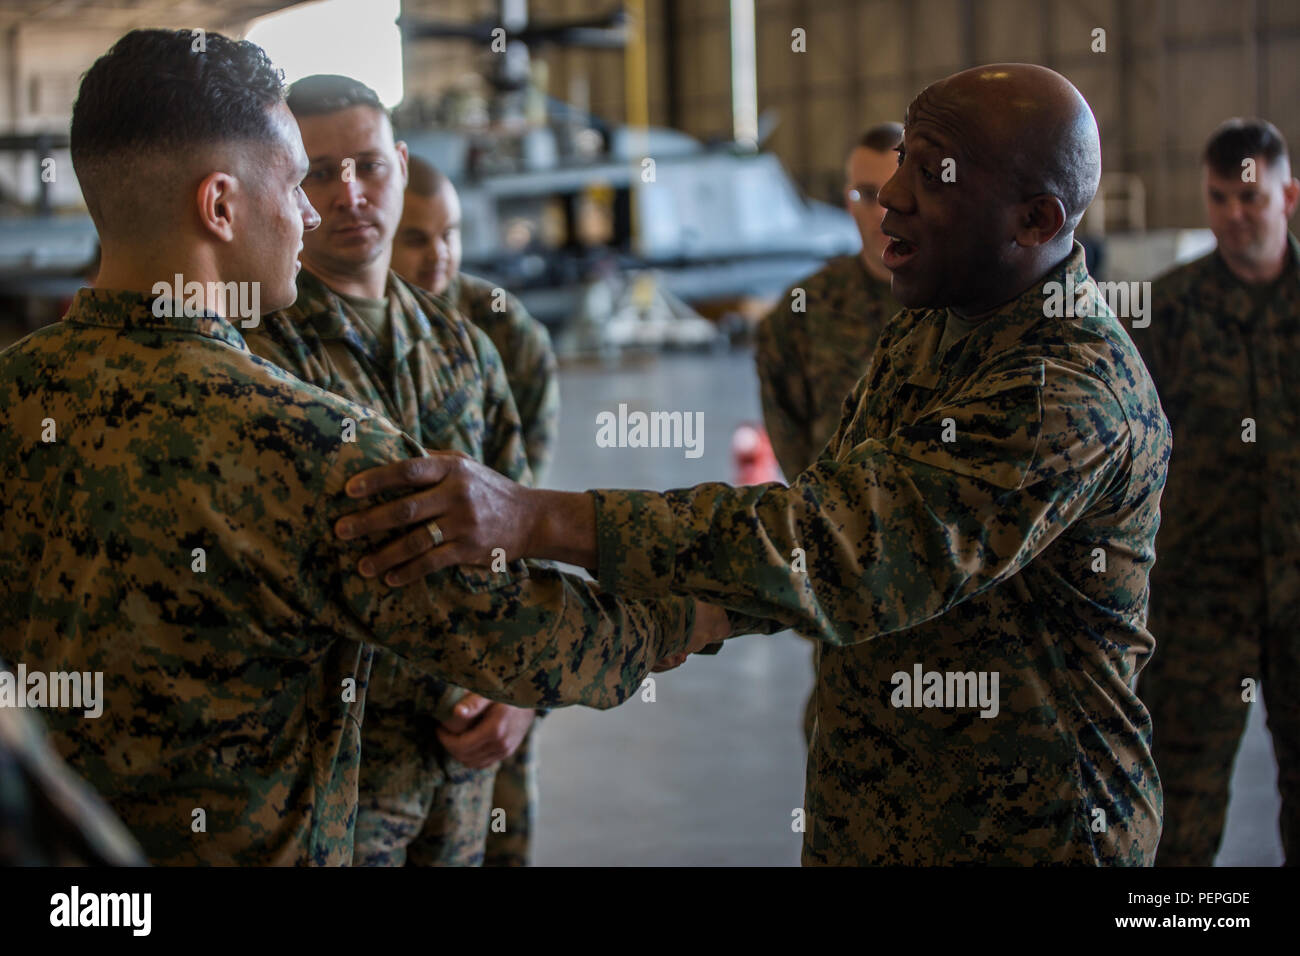 Sergeant Major of the Marine Corps, Sgt. Maj. Ronald L. Green, greets Marines of Marine Aircraft Group 49, 4th Marine Aircraft Wing, at Naval Air Station Joint Reserve Base New Orleans, Jan. 19, 2016. Sgt. Maj. Green addressed the Marines as a group and individually, urging them to protect what they’ve earned as a Marine and to continue upholding the standards of the Corps, on and off duty. Stock Photo